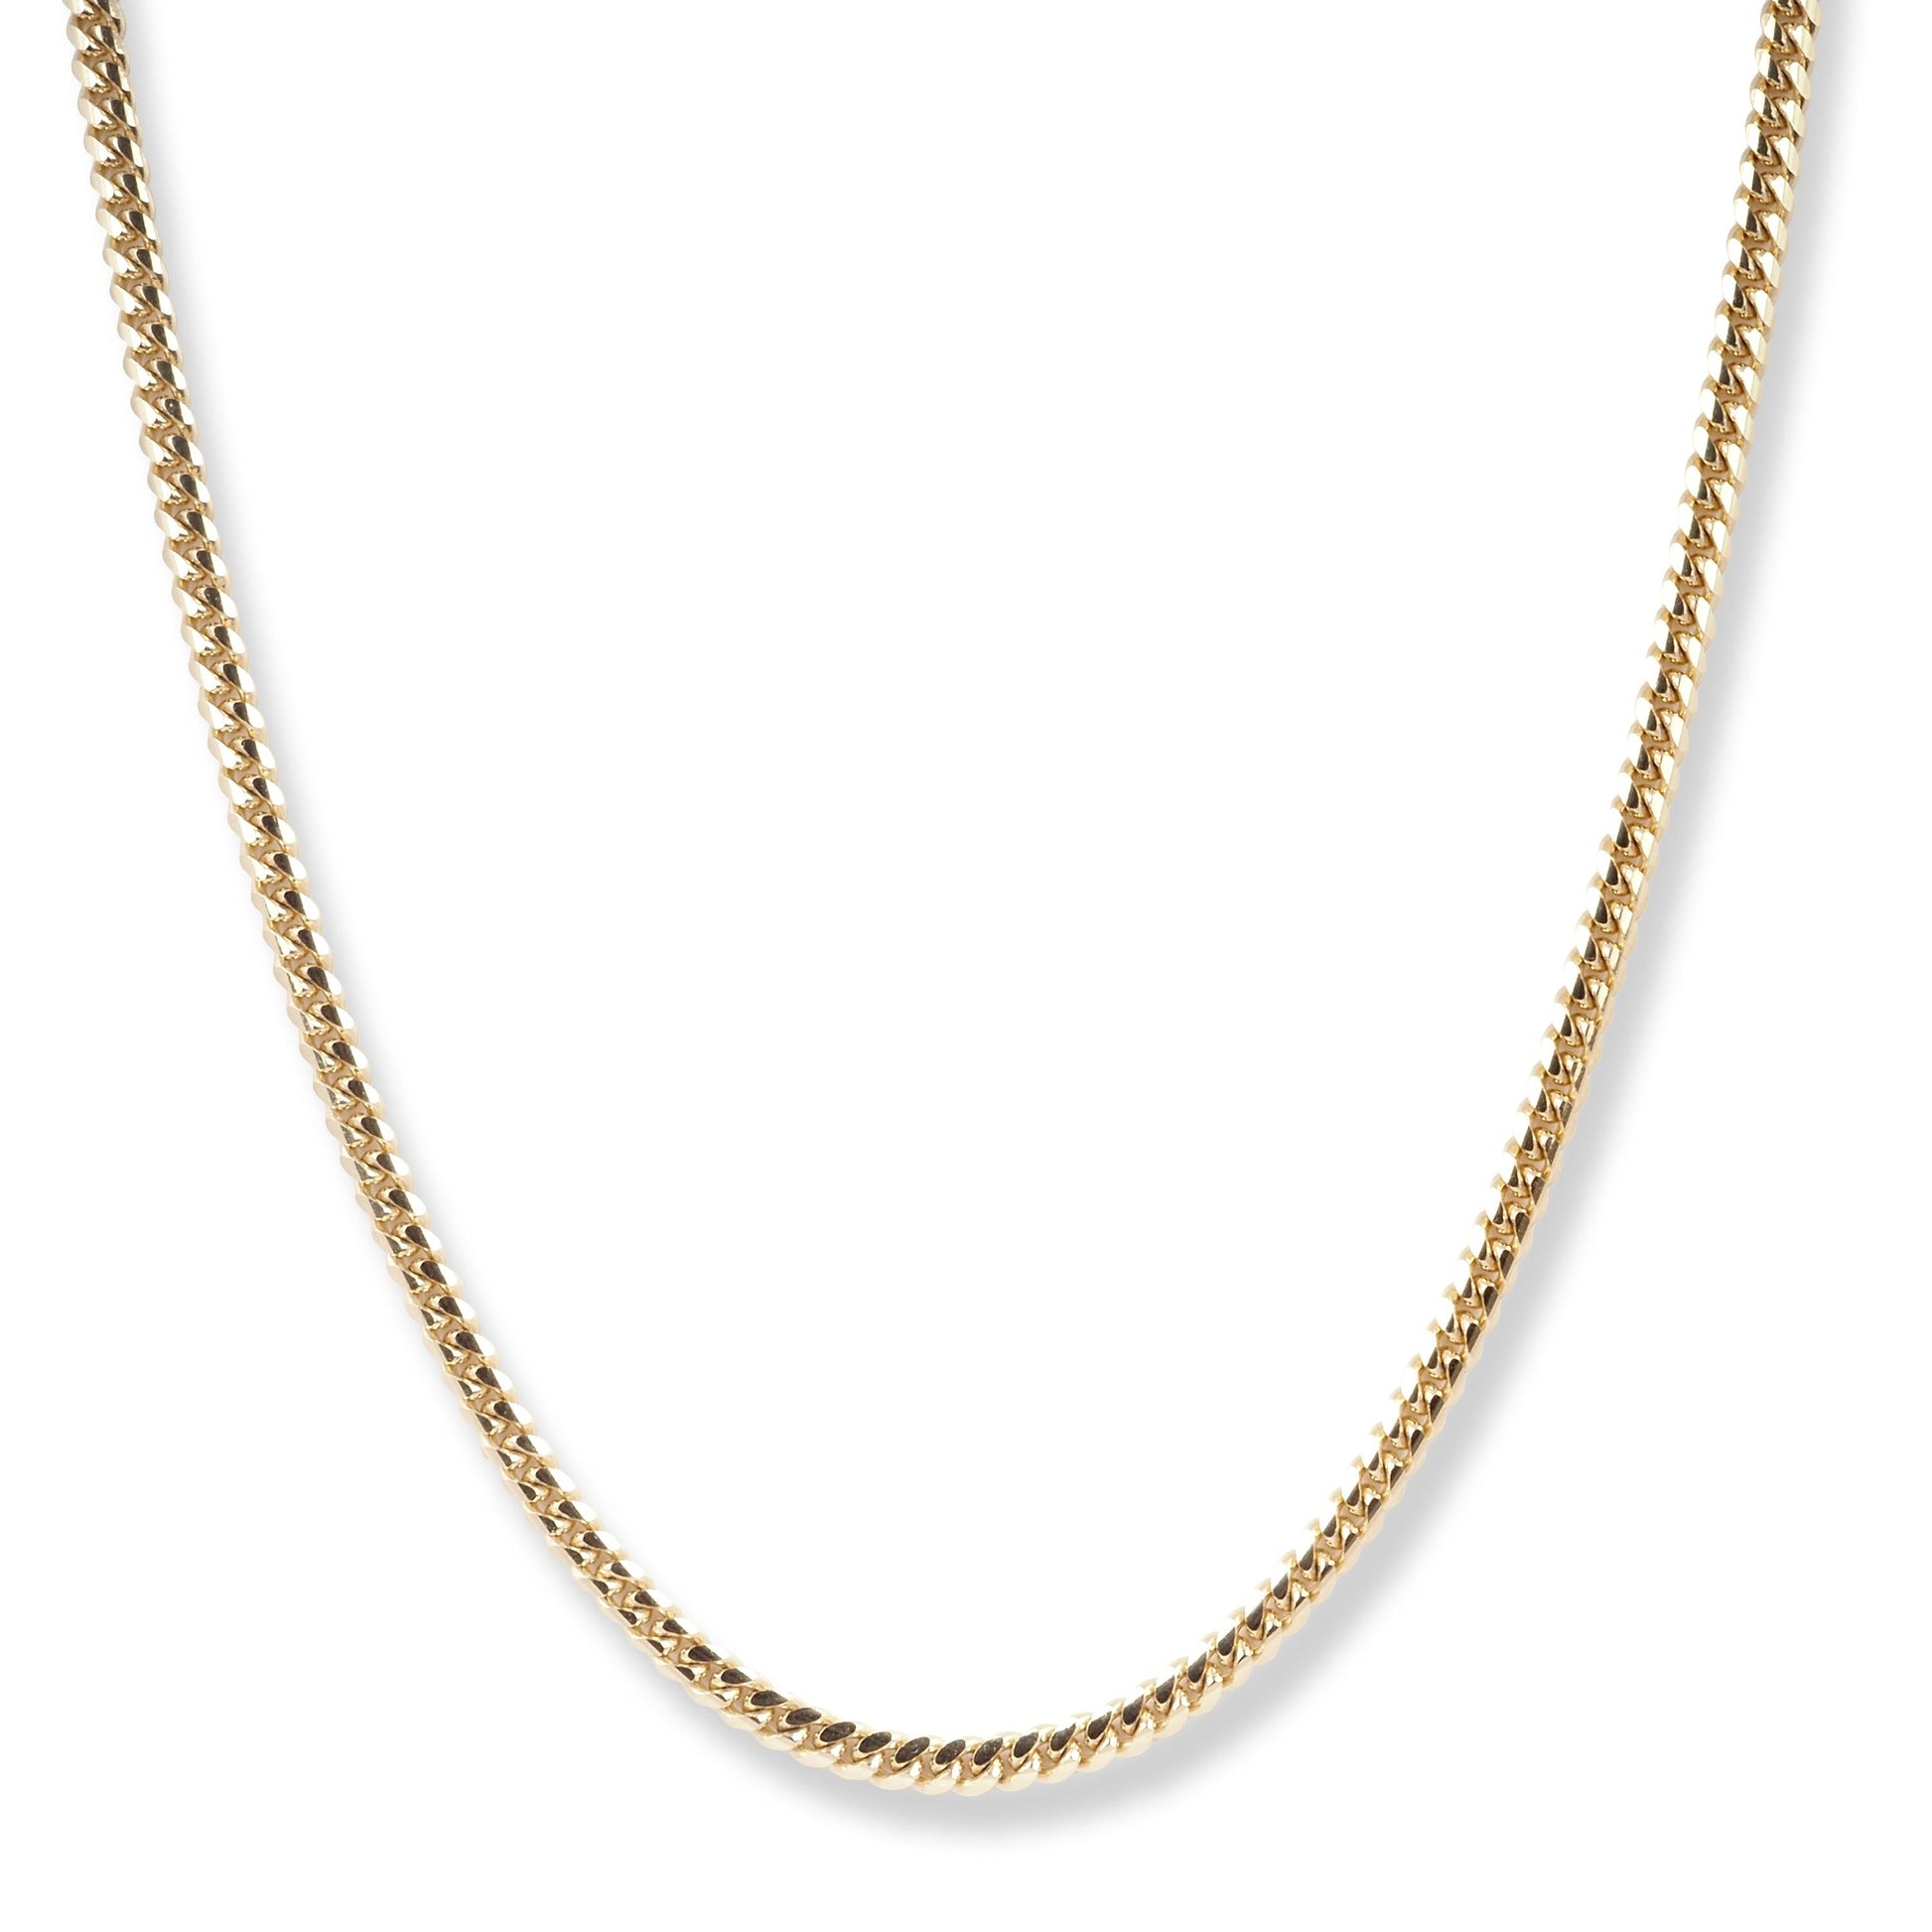 18ct Yellow Gold Curb Link Chain with Lobster Clasp C-3801 - Minar Jewellers